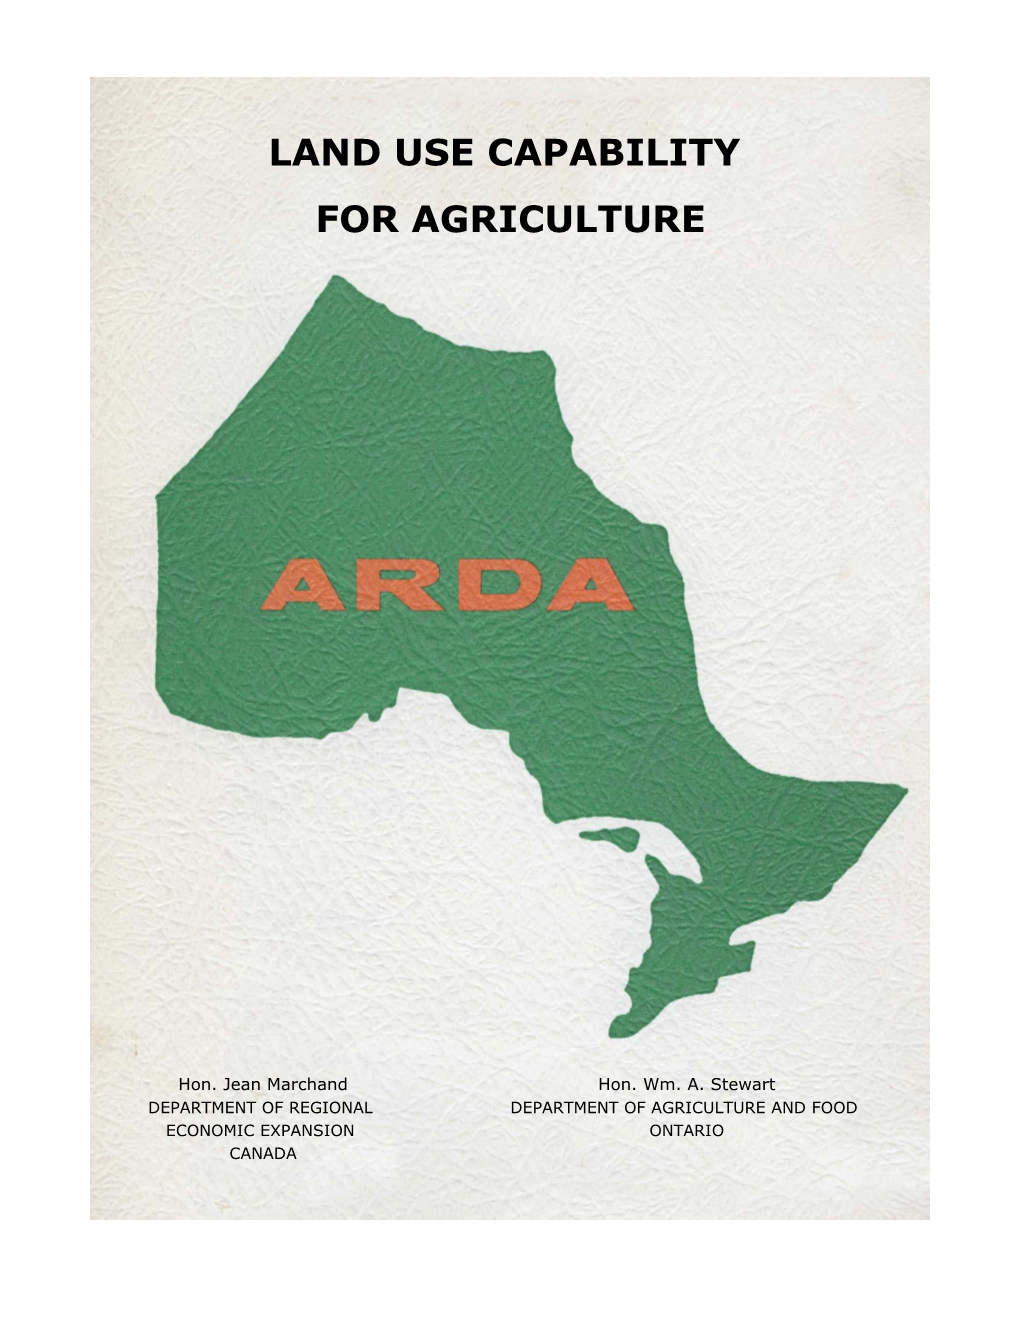 ACREAGES by Townships and Counties for AGRICULTURAL LAND USE CAPABILITY in SOUTHERN ONTARIO